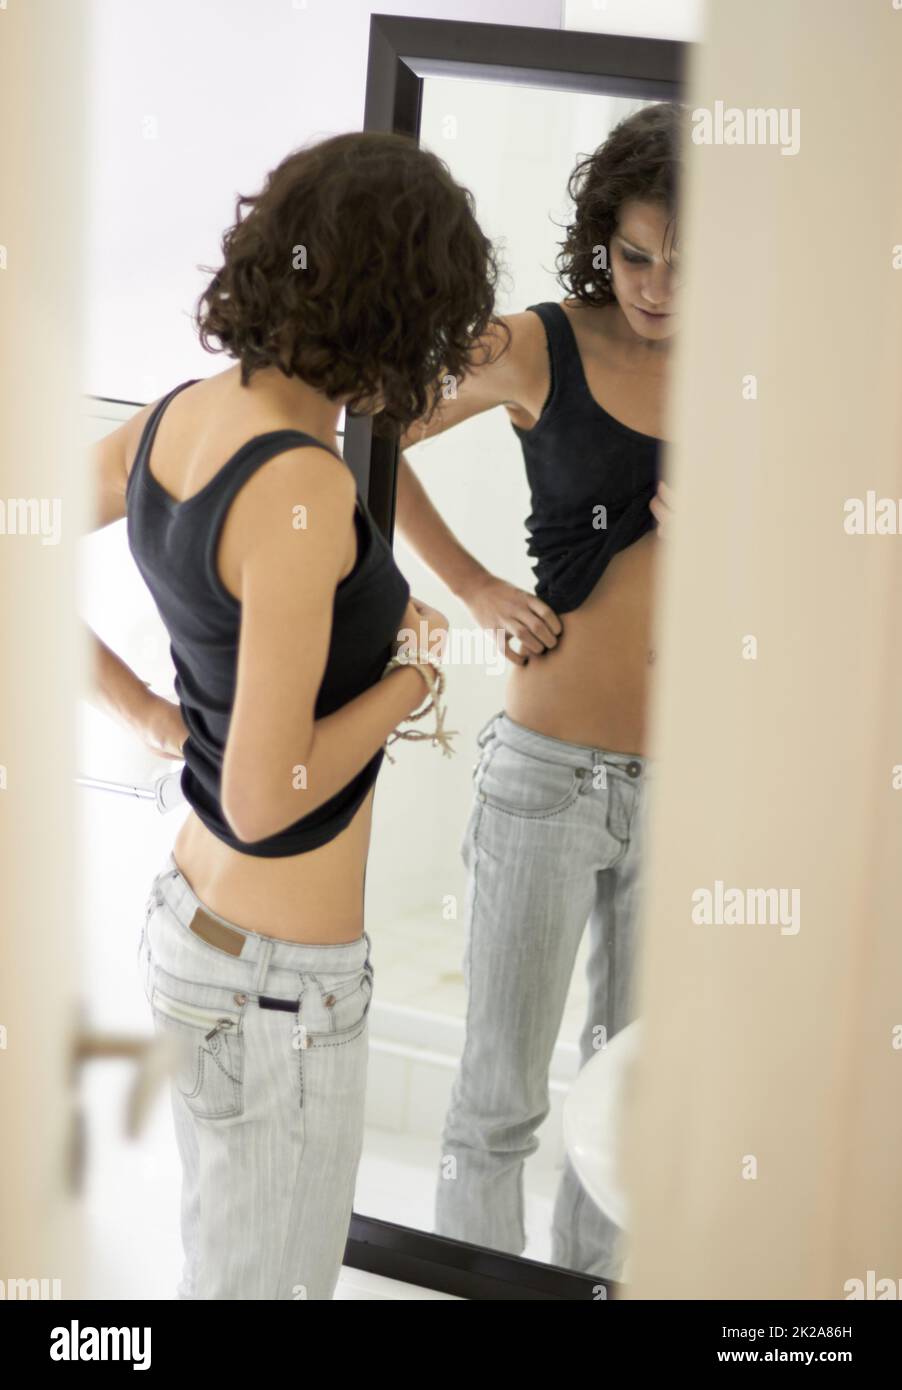 Shell never be skinny enough. A very skinny girl obsessing over her body. Stock Photo